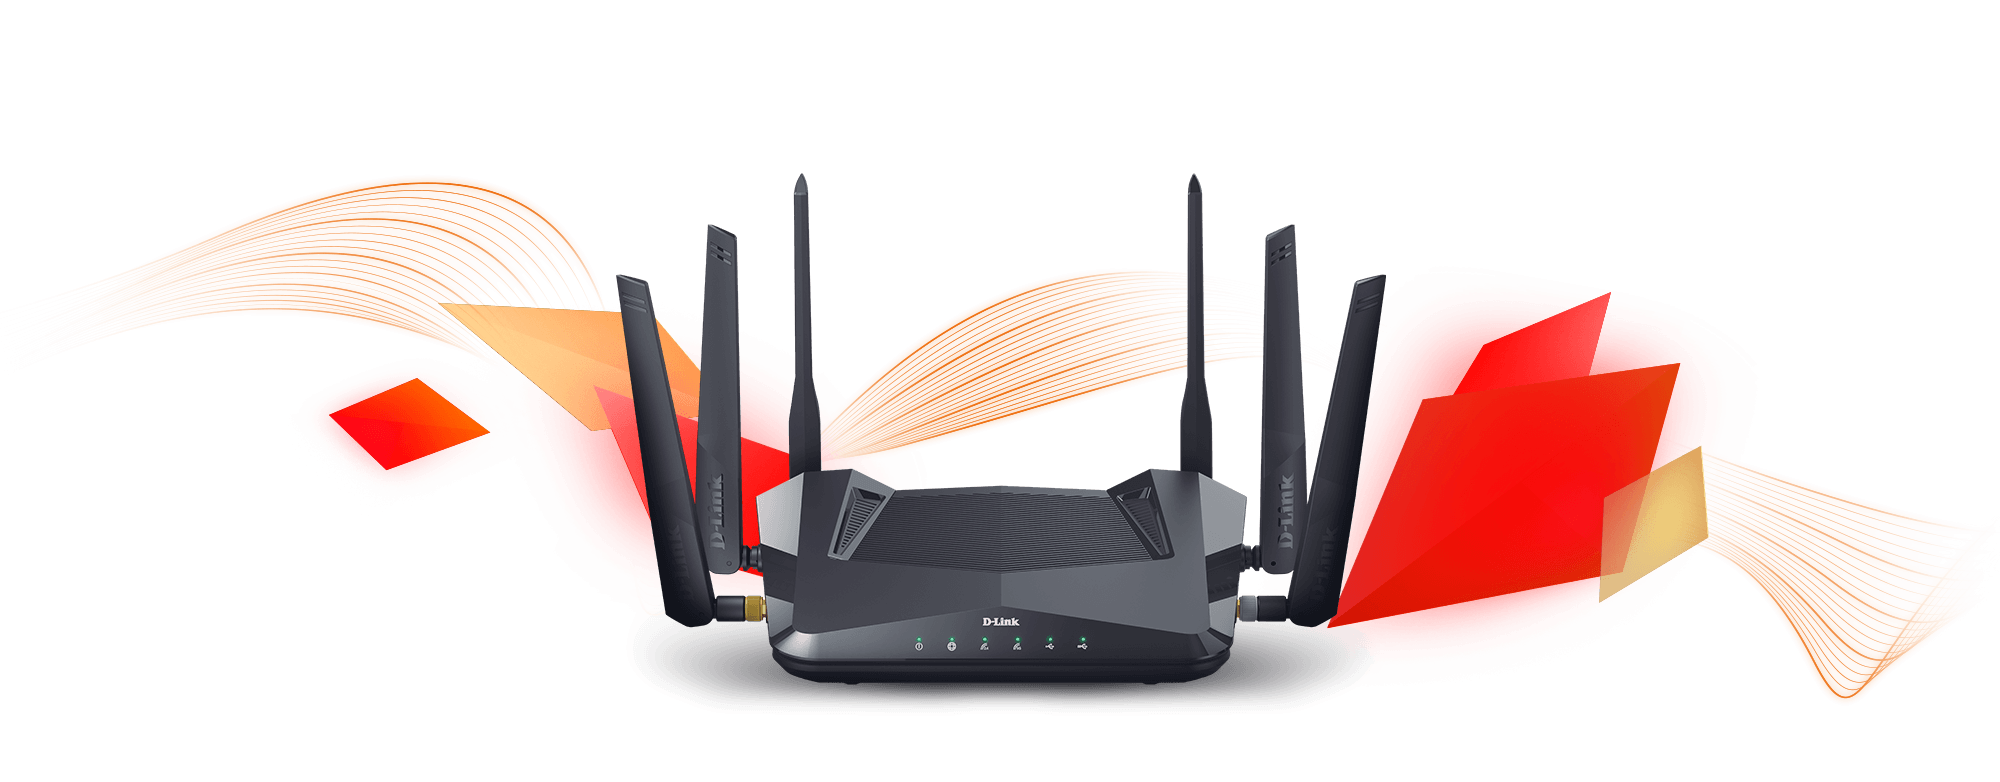 DIR-X5460 AX5400 Wi-Fi 6 Router with red diamond shapes and wireless waves